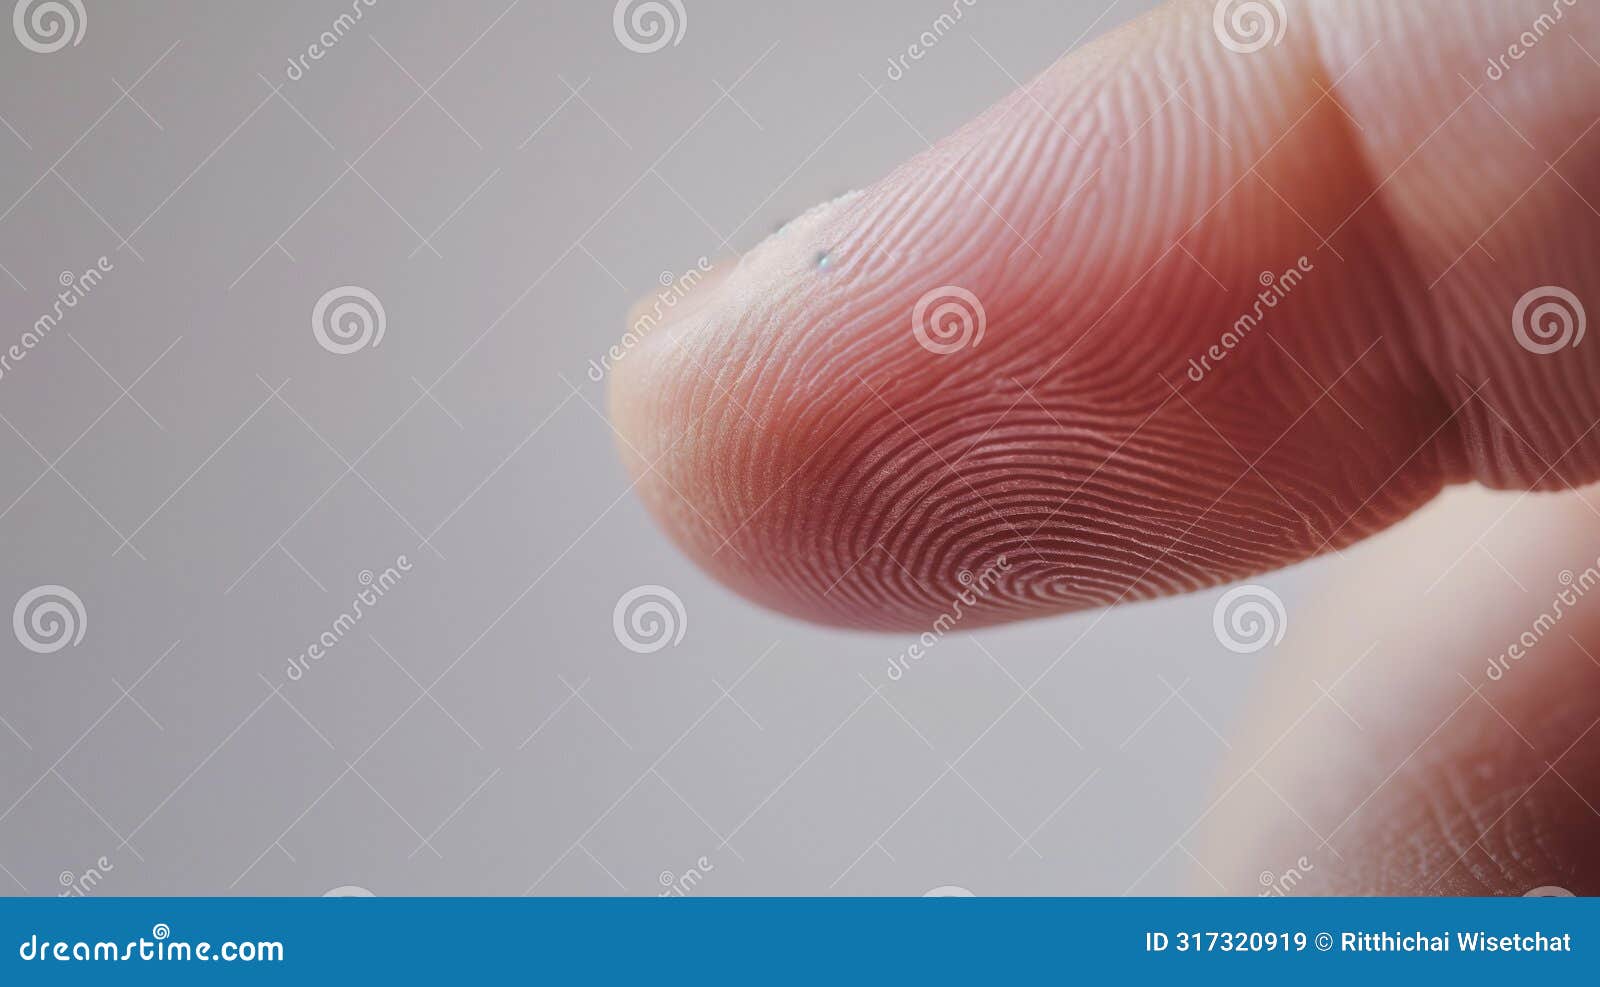 close-up of a human fingertip showing detailed fingerprints and a tiny blue microchip implant